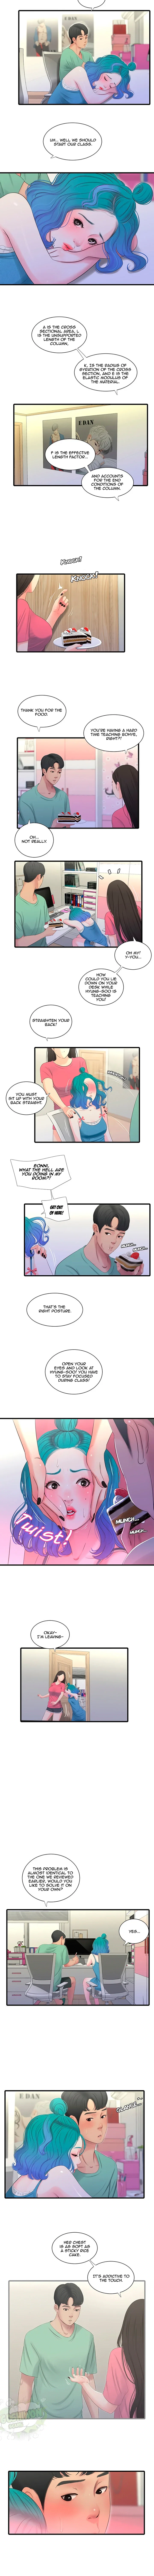 maidens-in-law-chap-22-4